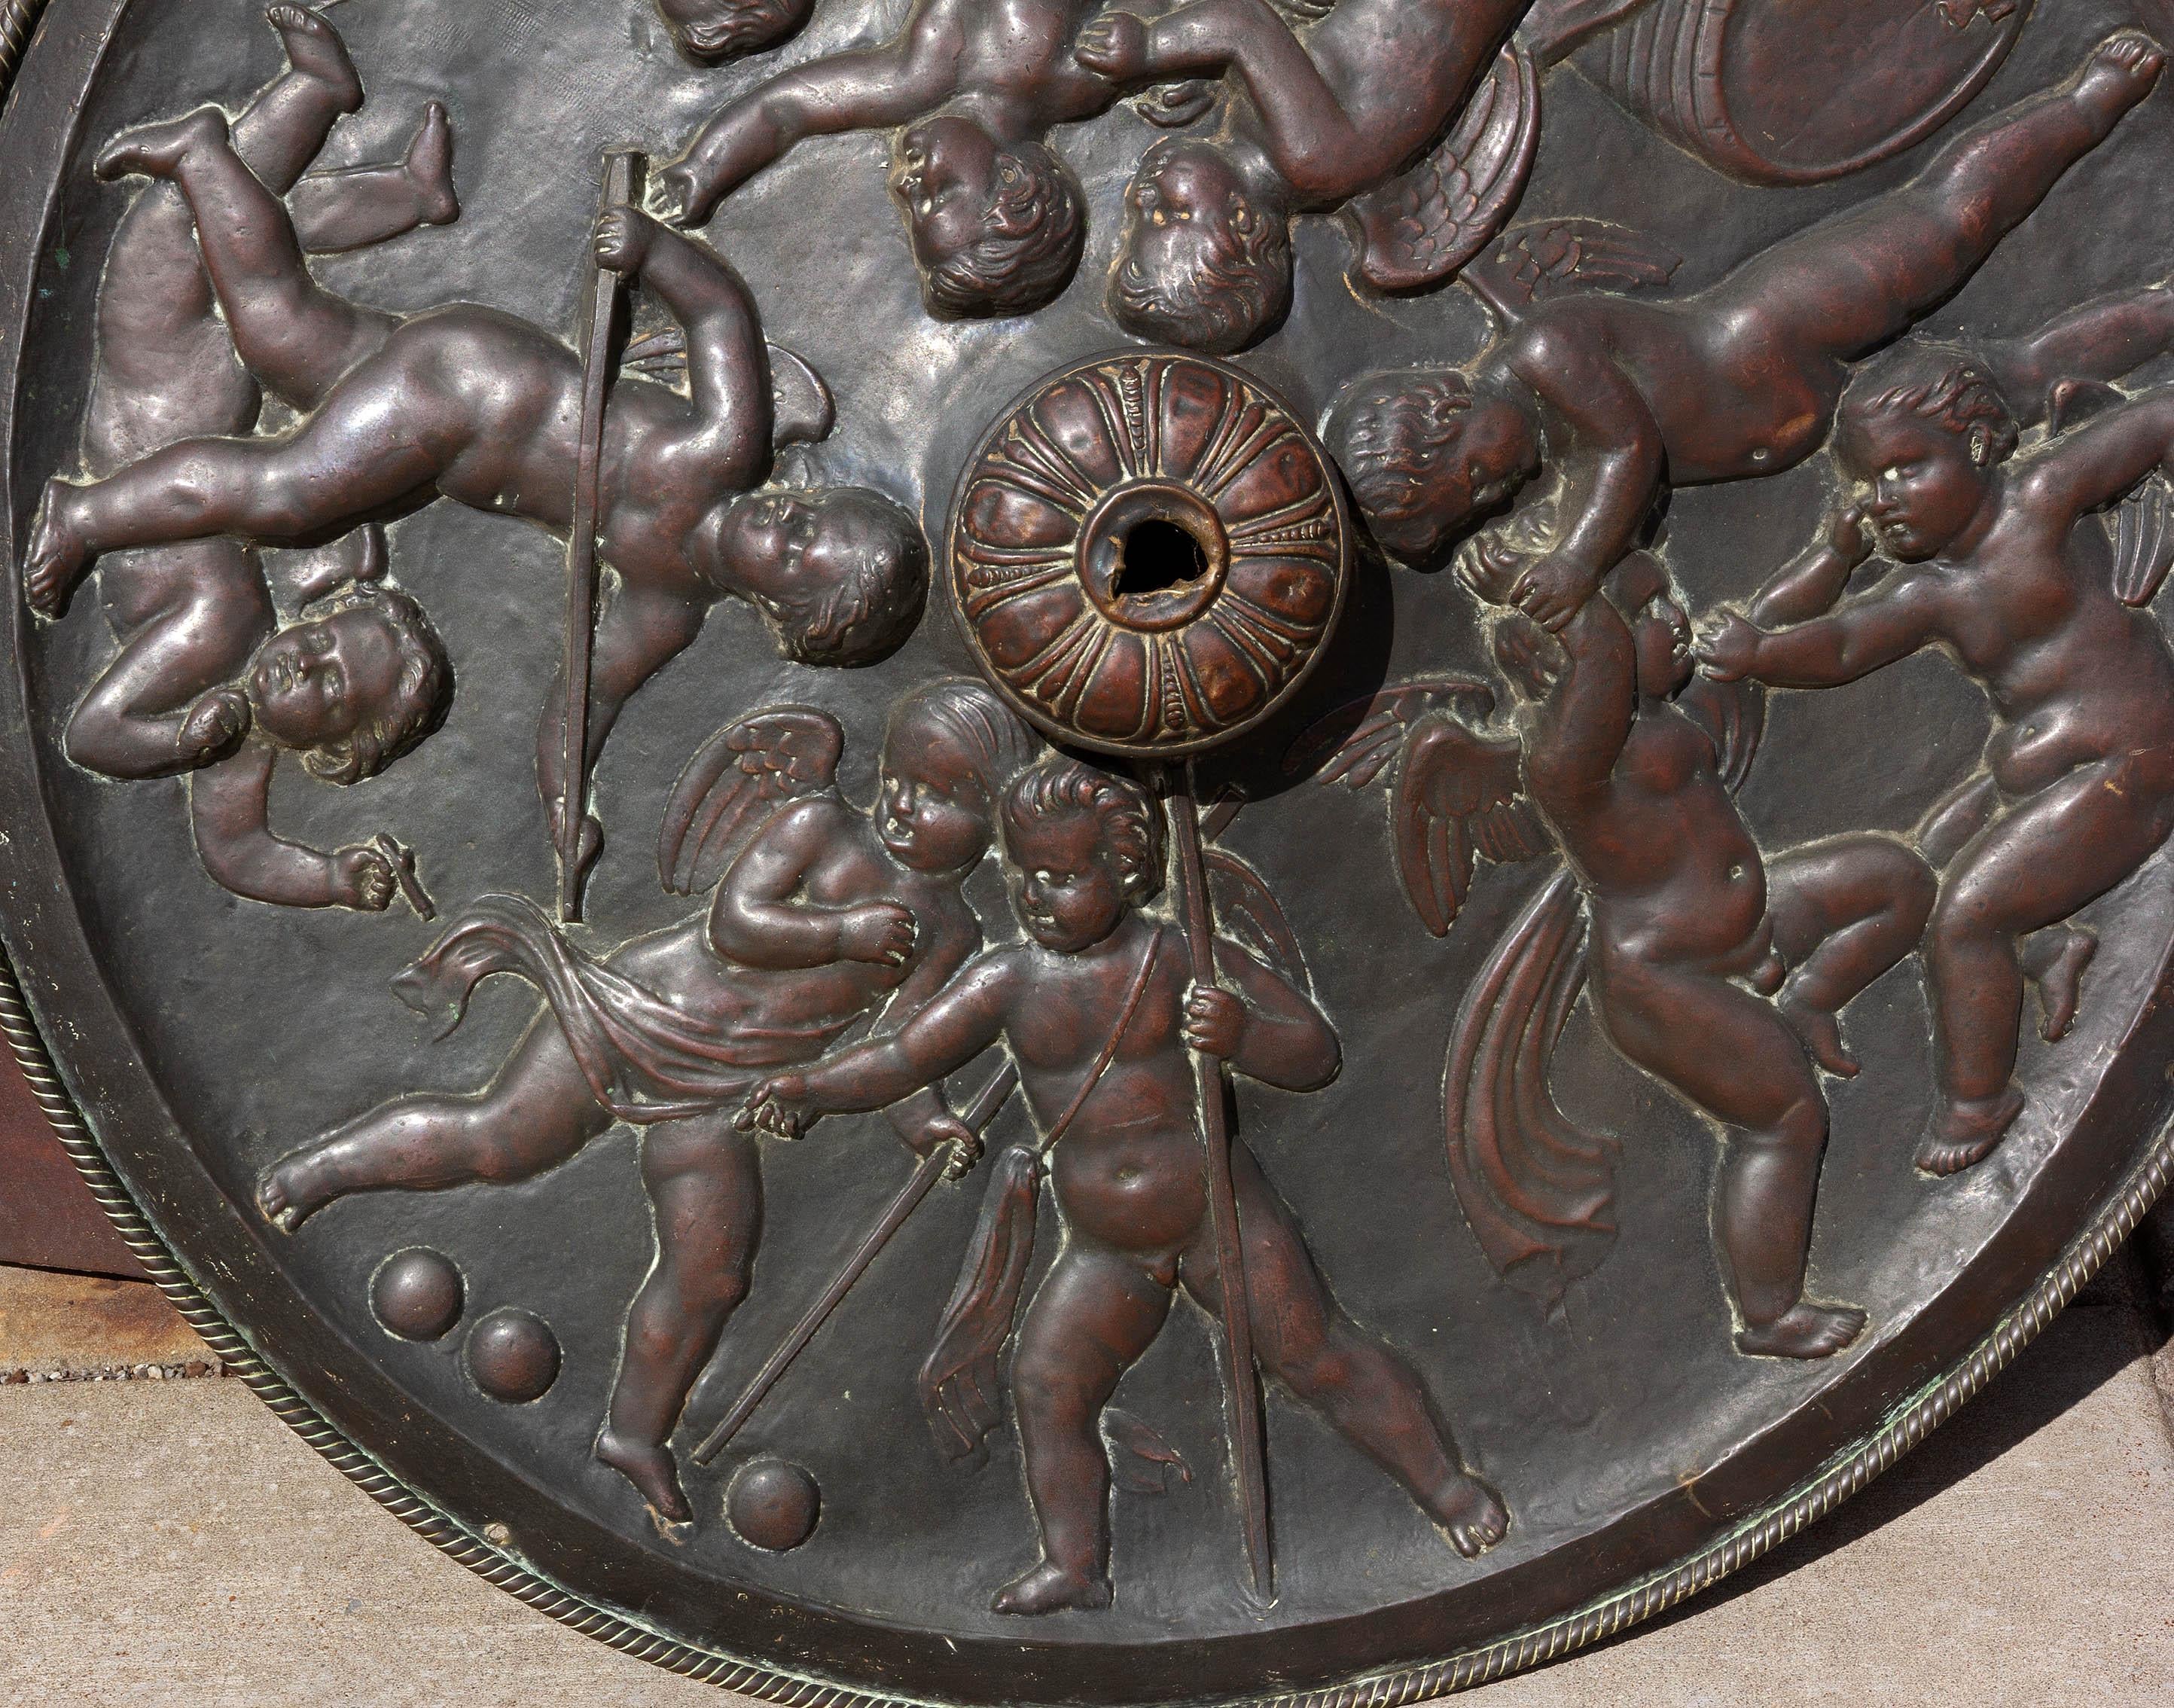 19th century bronze patinated repousse ceiling medallion. Three dimensional scene of reveling followers of Bacchus.